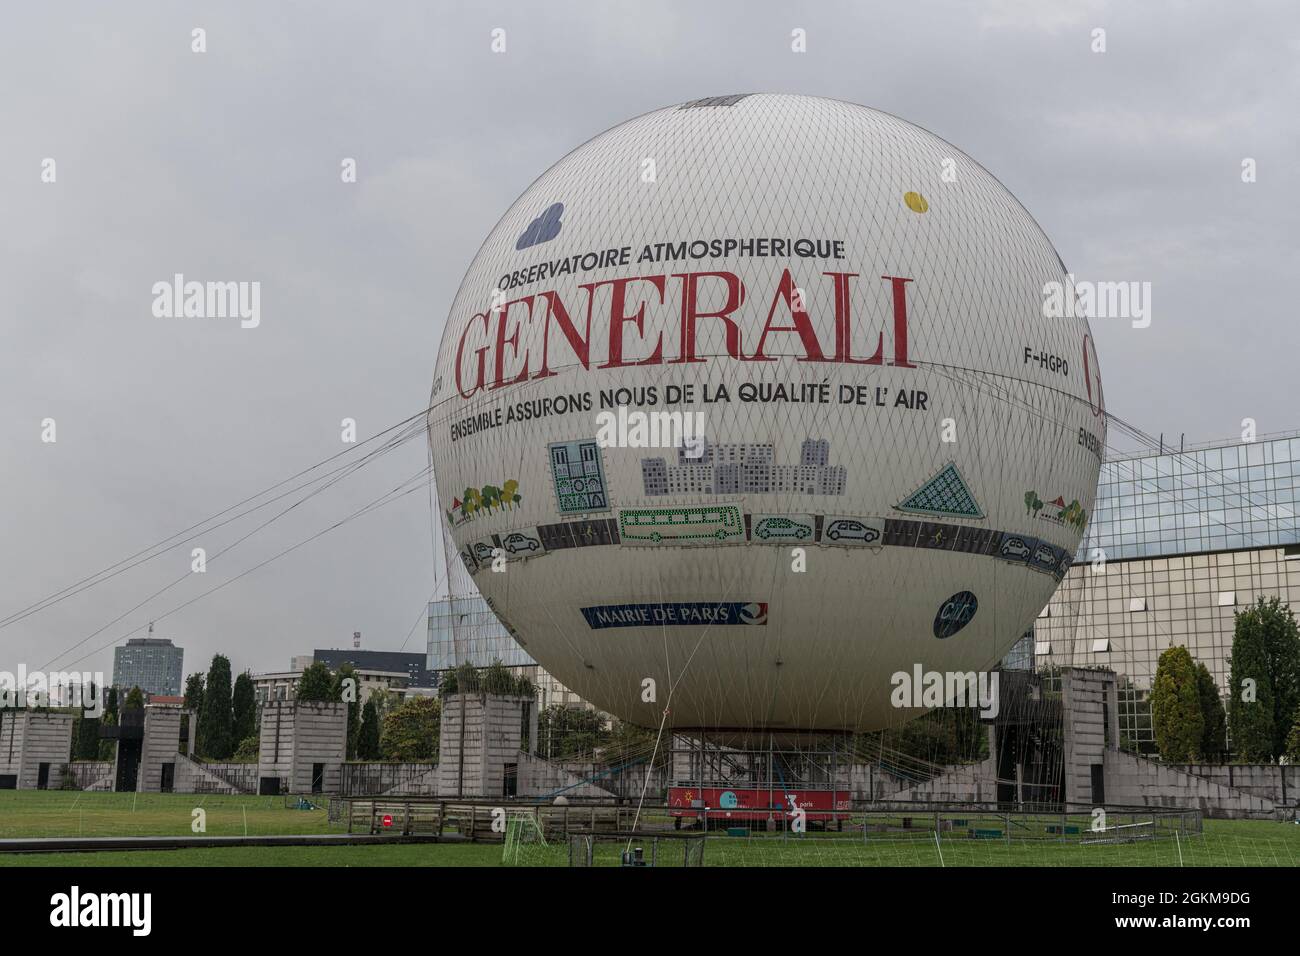 The Ballon Generali is a tethered helium balloon, used as tourist  attraction and as an air quality awareness tool. Installed in Paris since  1999 in the Parc André-Citroën,. Paris, France, September 14th,